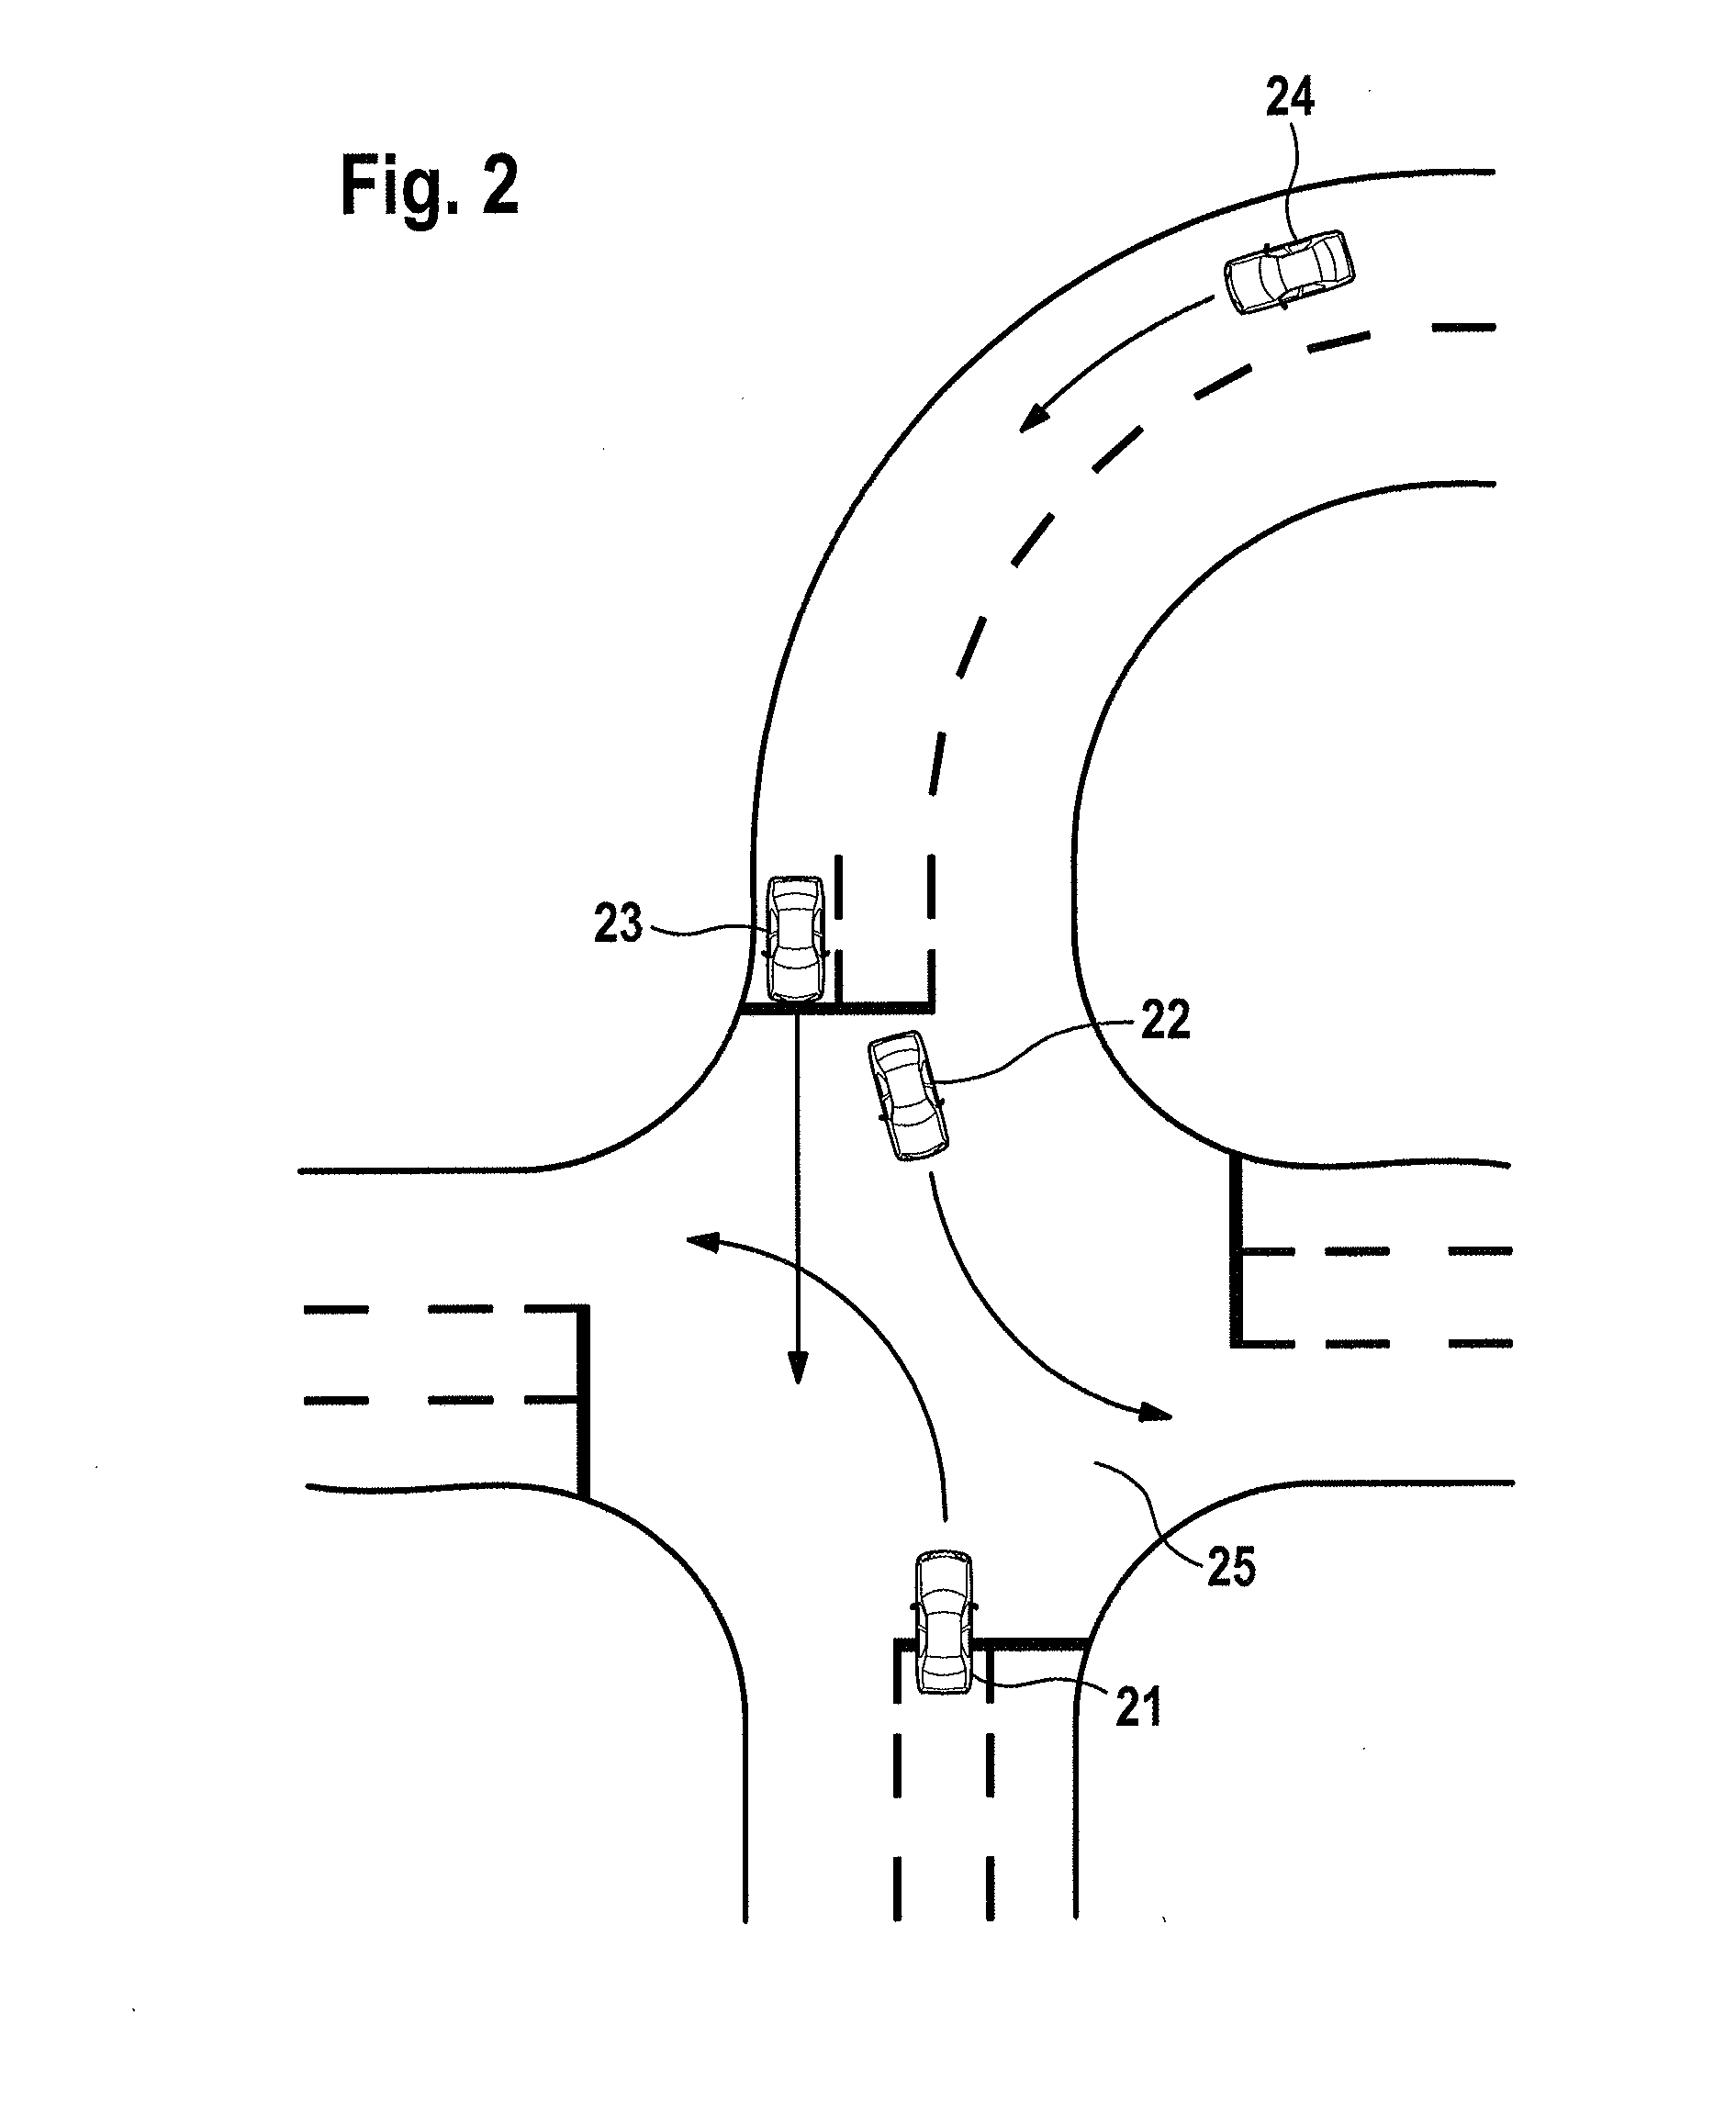 Method and system for validating information